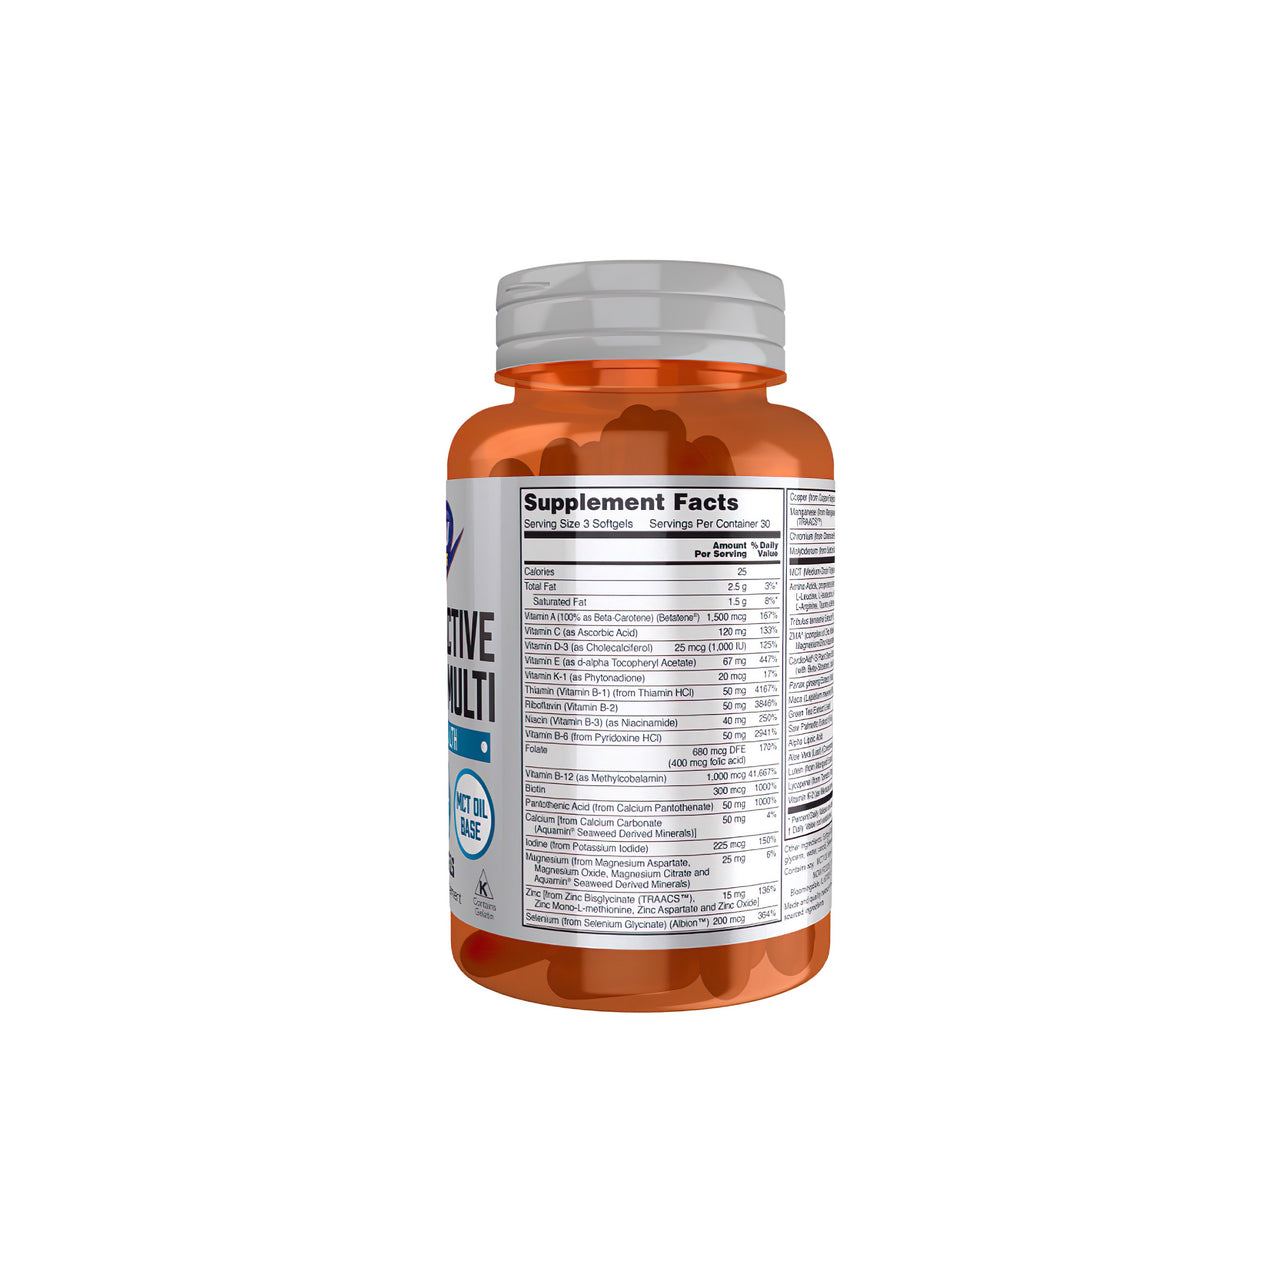 A bottle of Men's Active Sports Multi 180 Softgels by Now Foods on a white background.